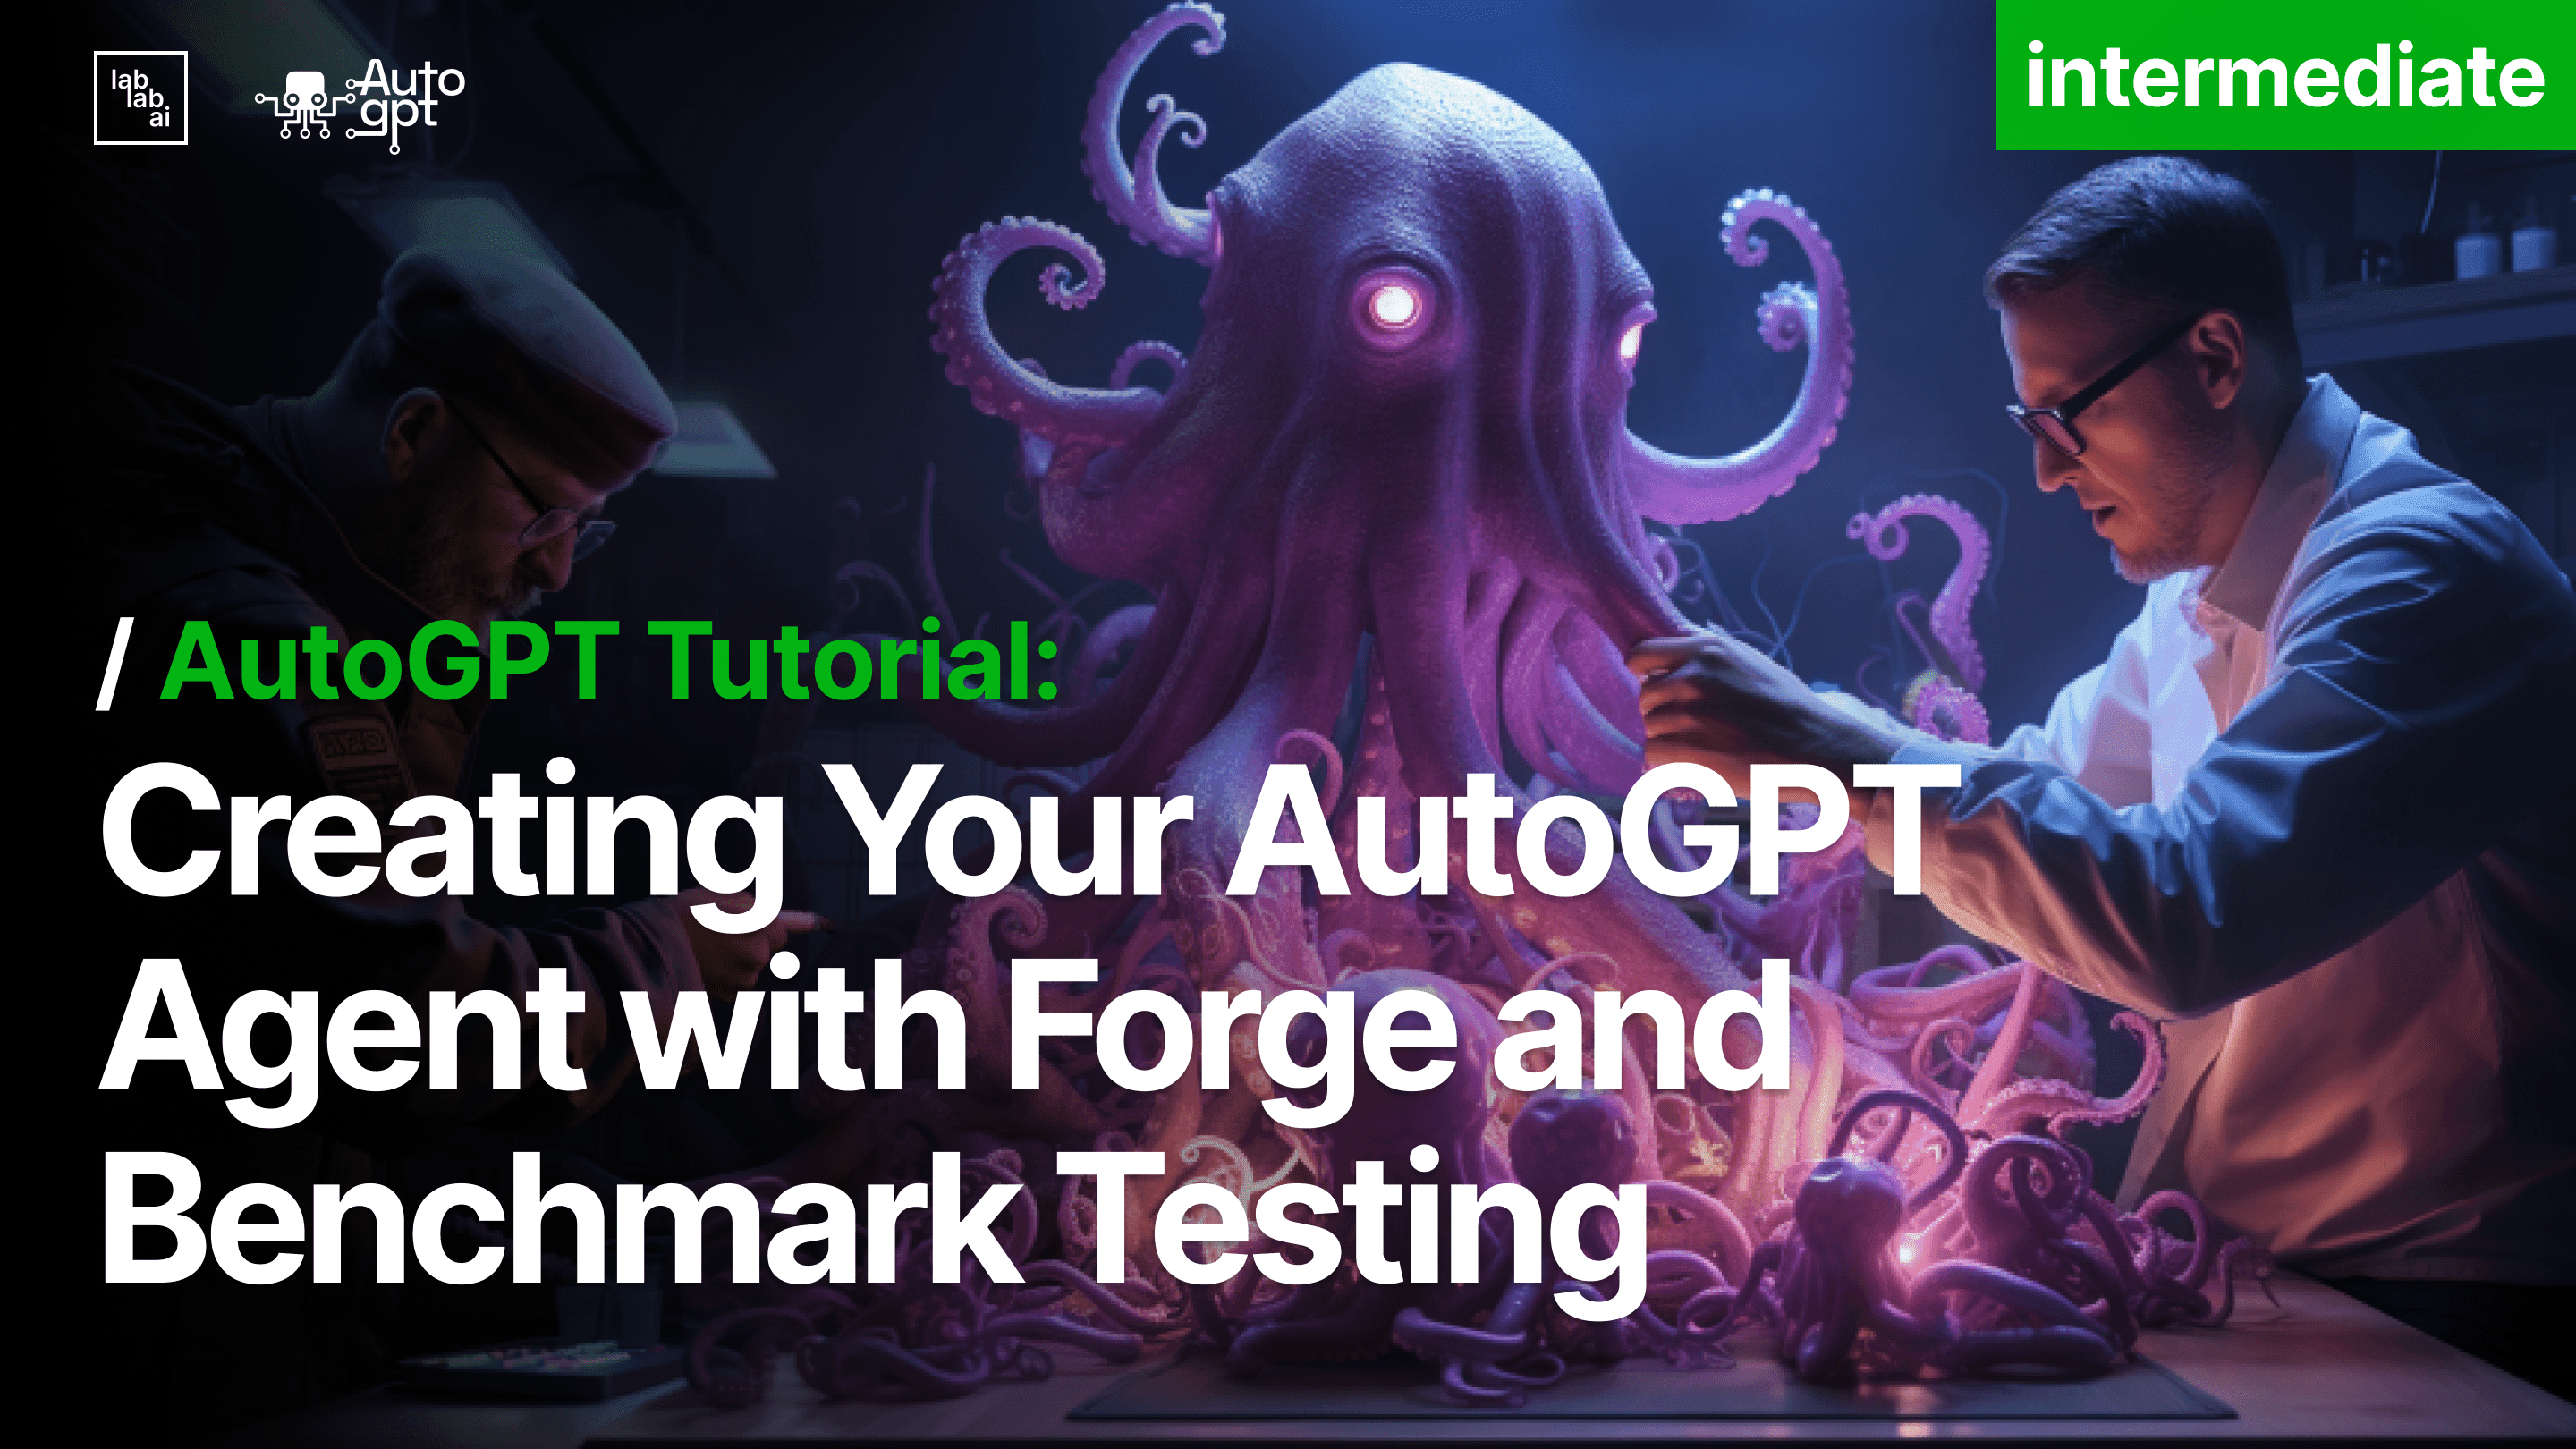 How to build your own AutoGPT agent with Forge and test it with Benchmark